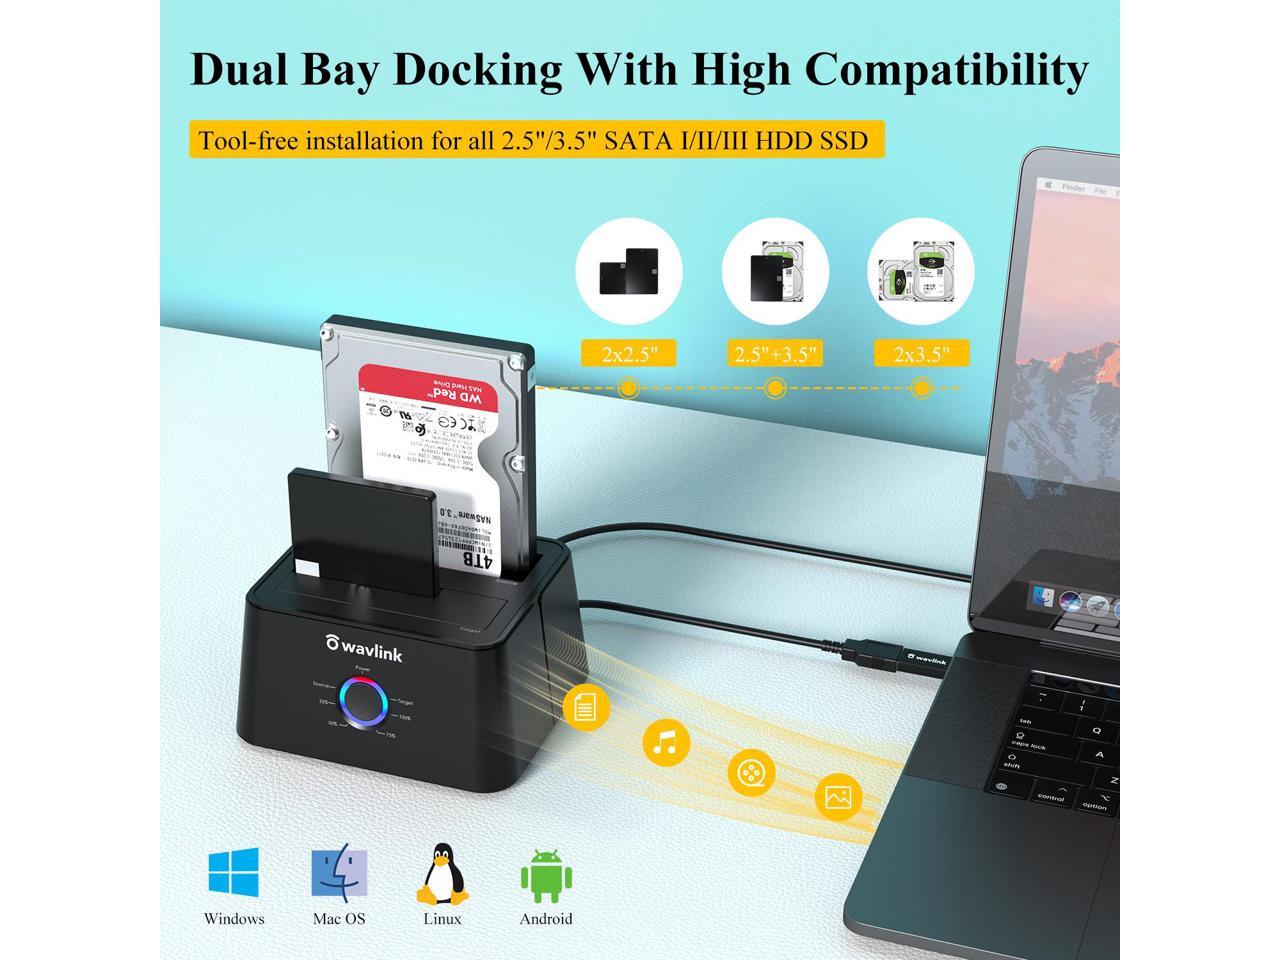 Wavlink 12TB USB 3.0 Dual Bay External Hard Drive Docking Station Duplicator/Clone Functio for 2.5" 3.5" SATA HDD/SSD Hard Drive Enclosure Transmission Rates Offline and One Button Backup - Newegg.com